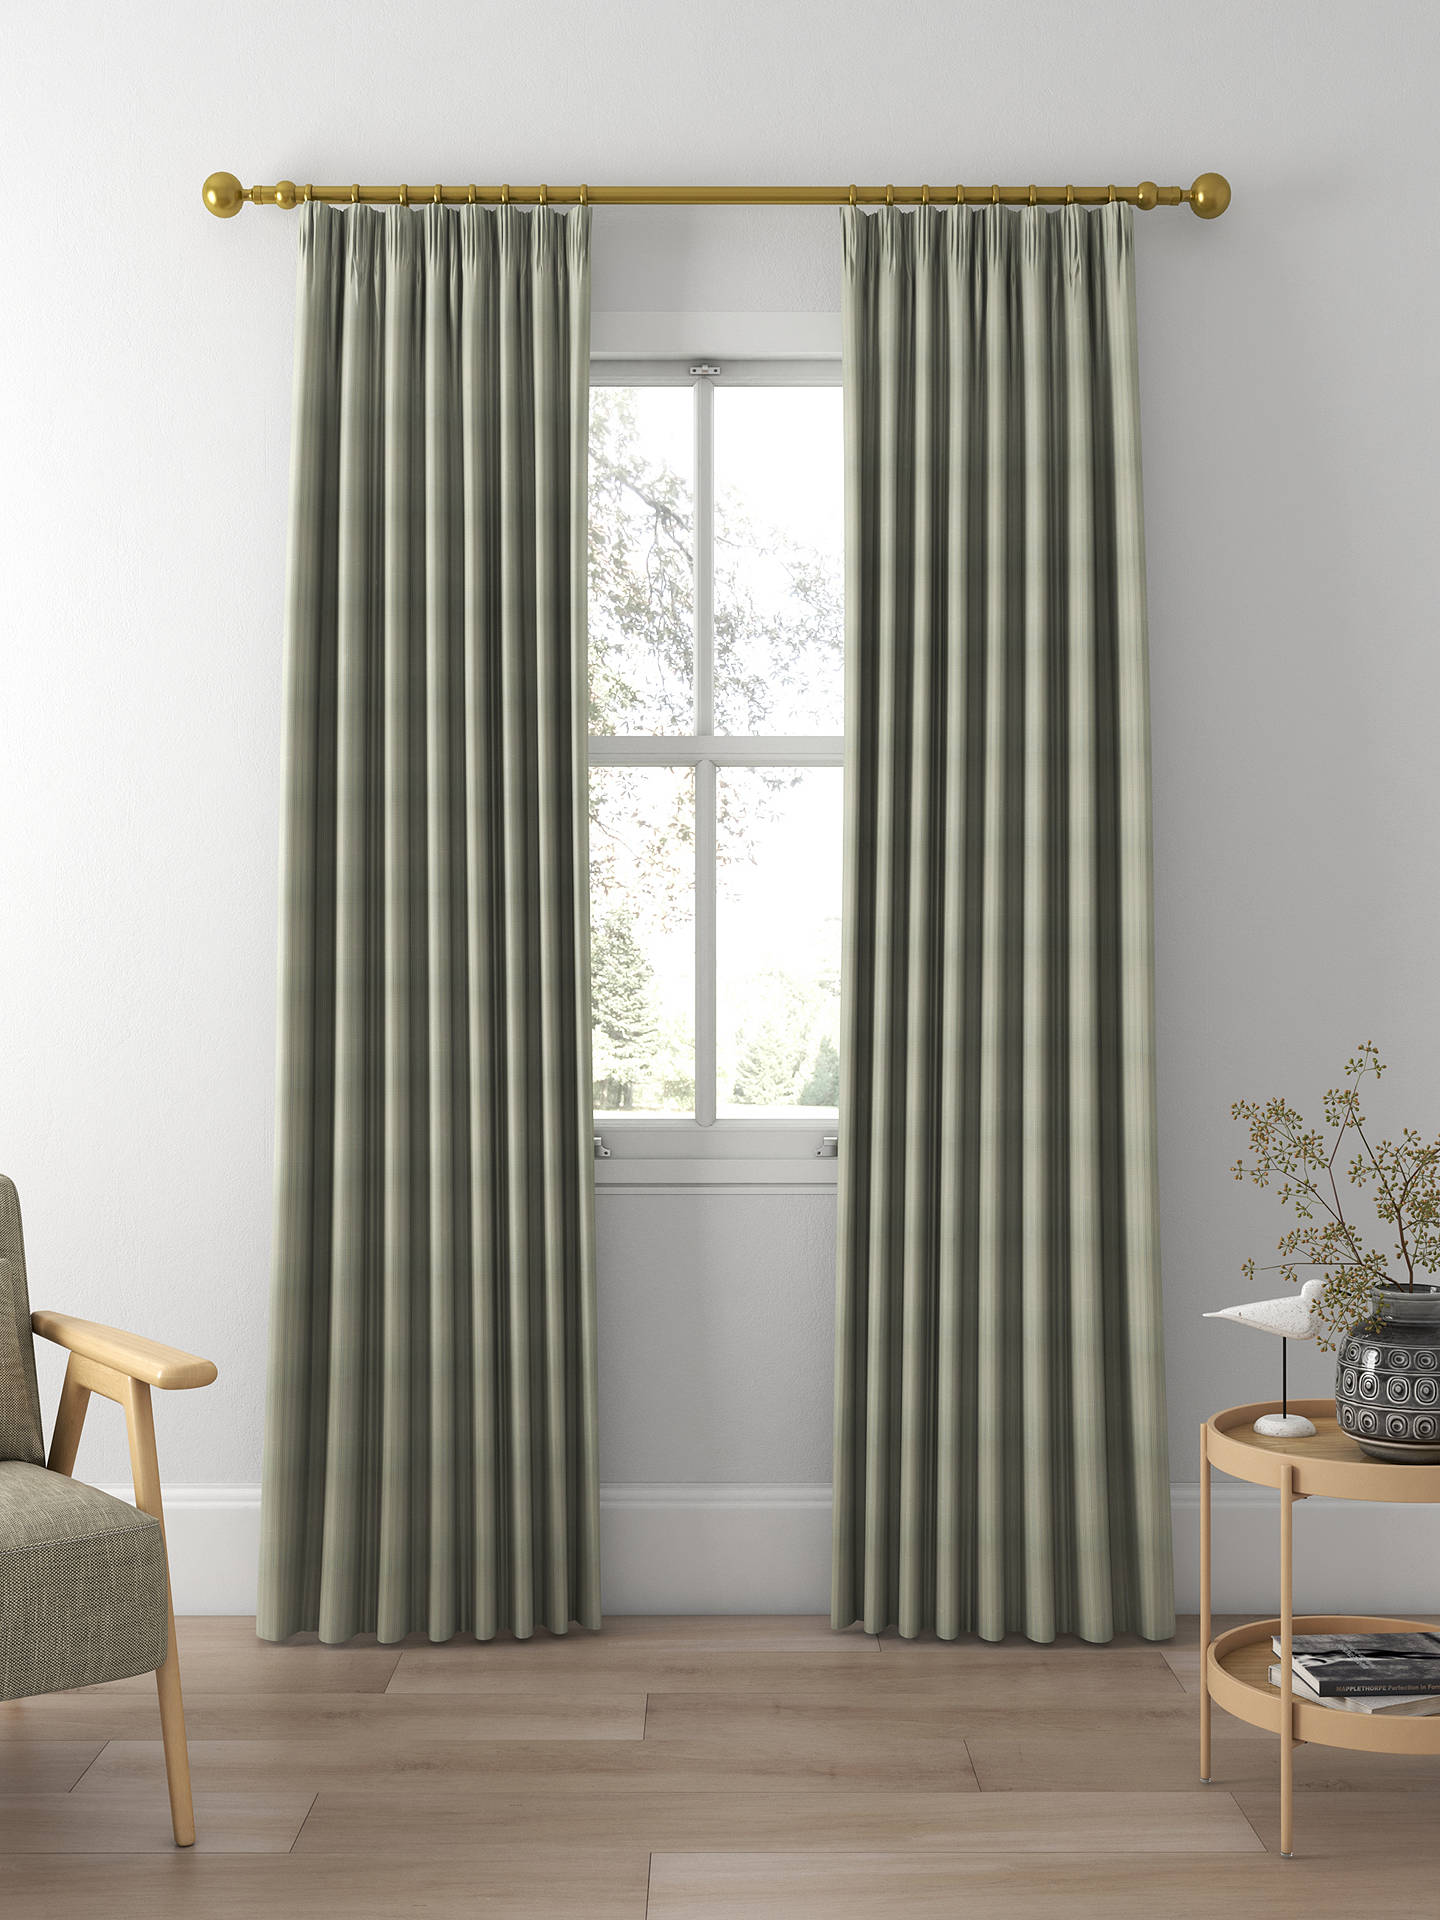 Scion Concentric Furnishing Made to Measure Curtains, Coast